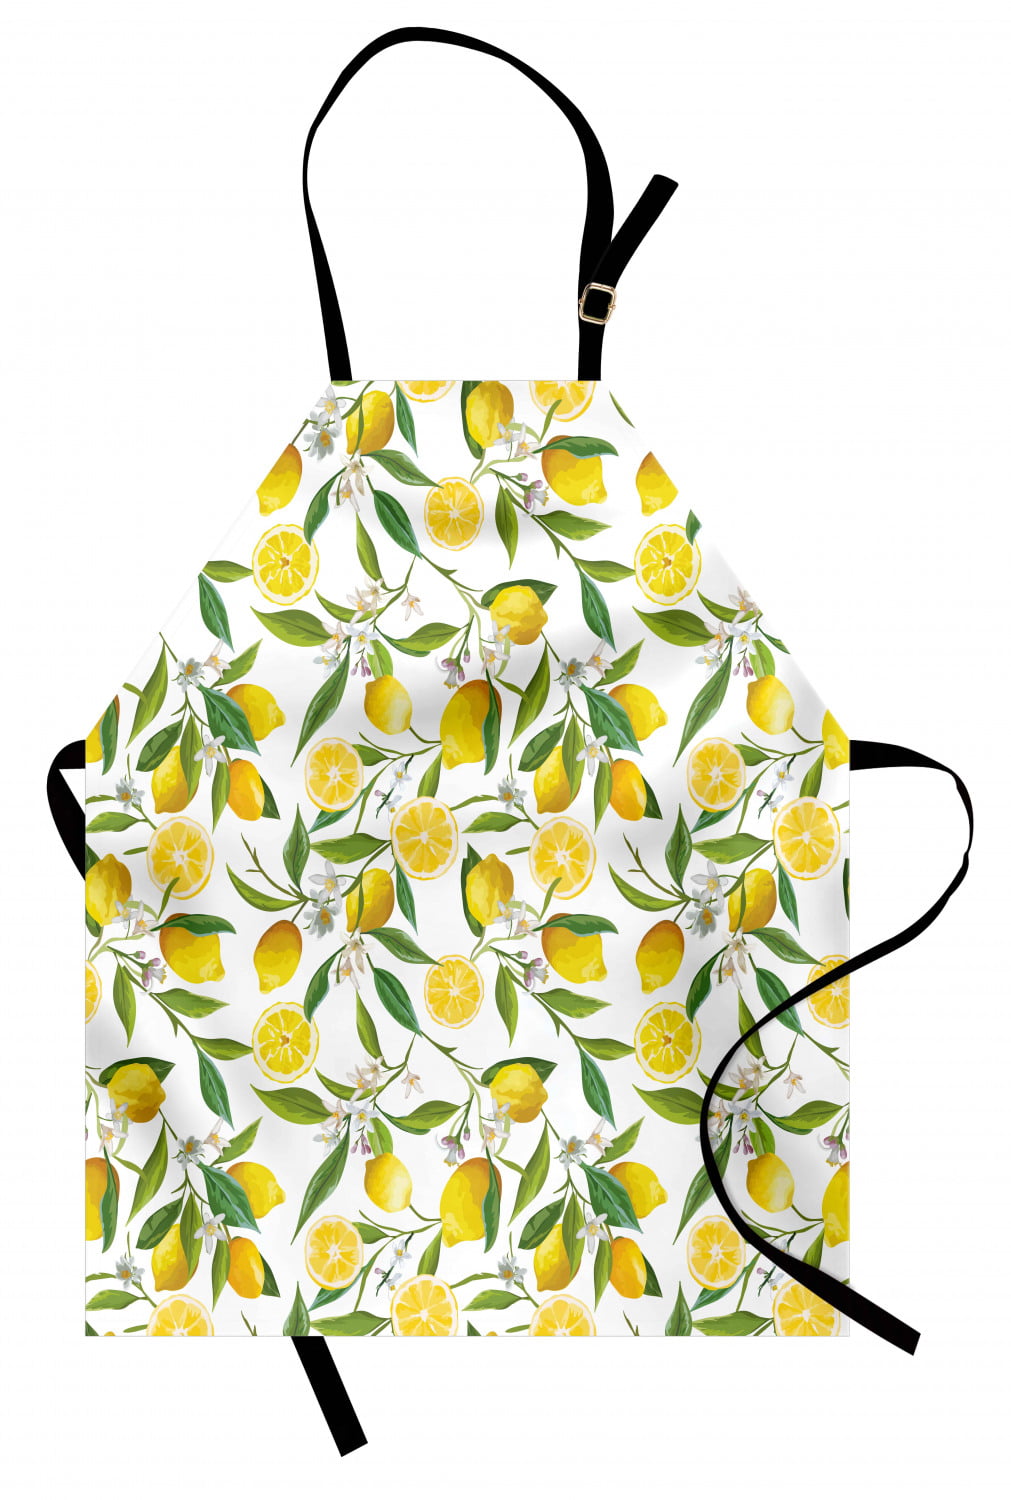 Details about   Ambesonne Apron Adjustable Neck for Gardening and Cooking Unisex Clear Image 